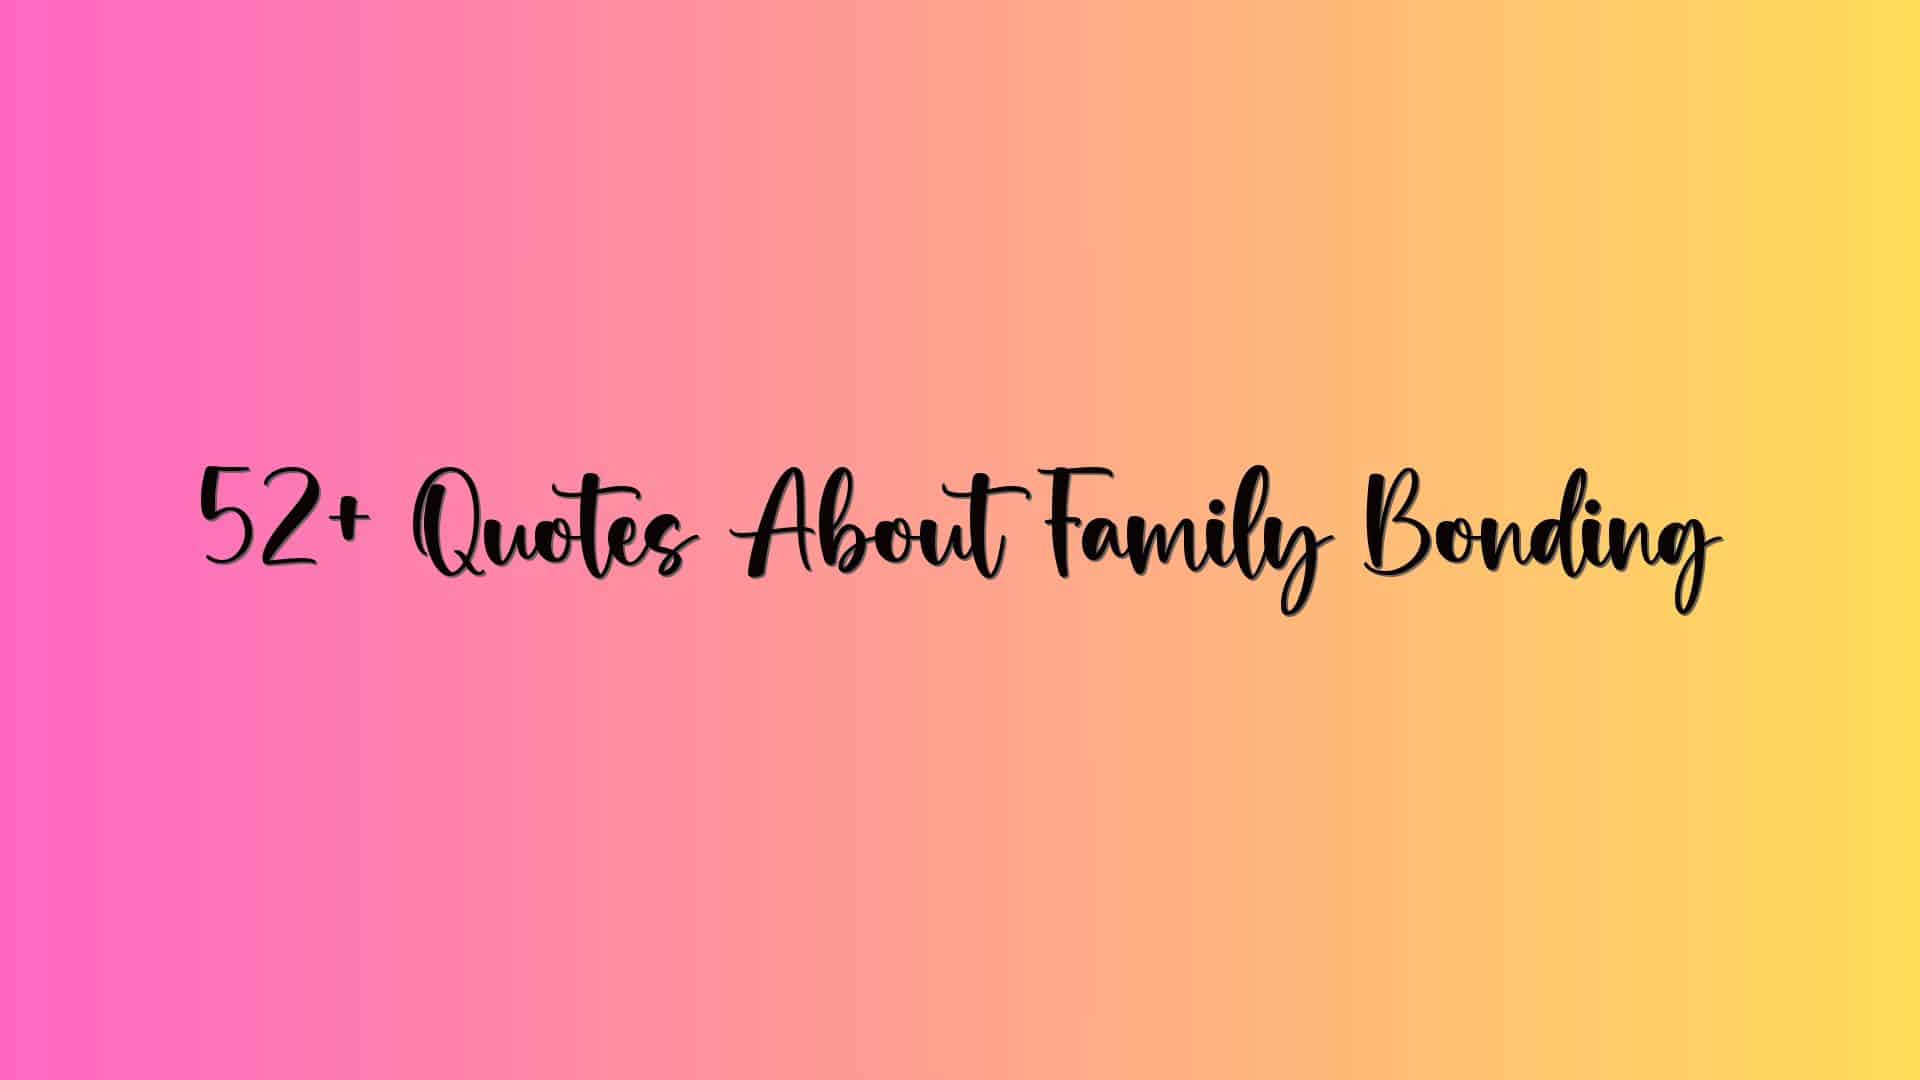 52+ Quotes About Family Bonding